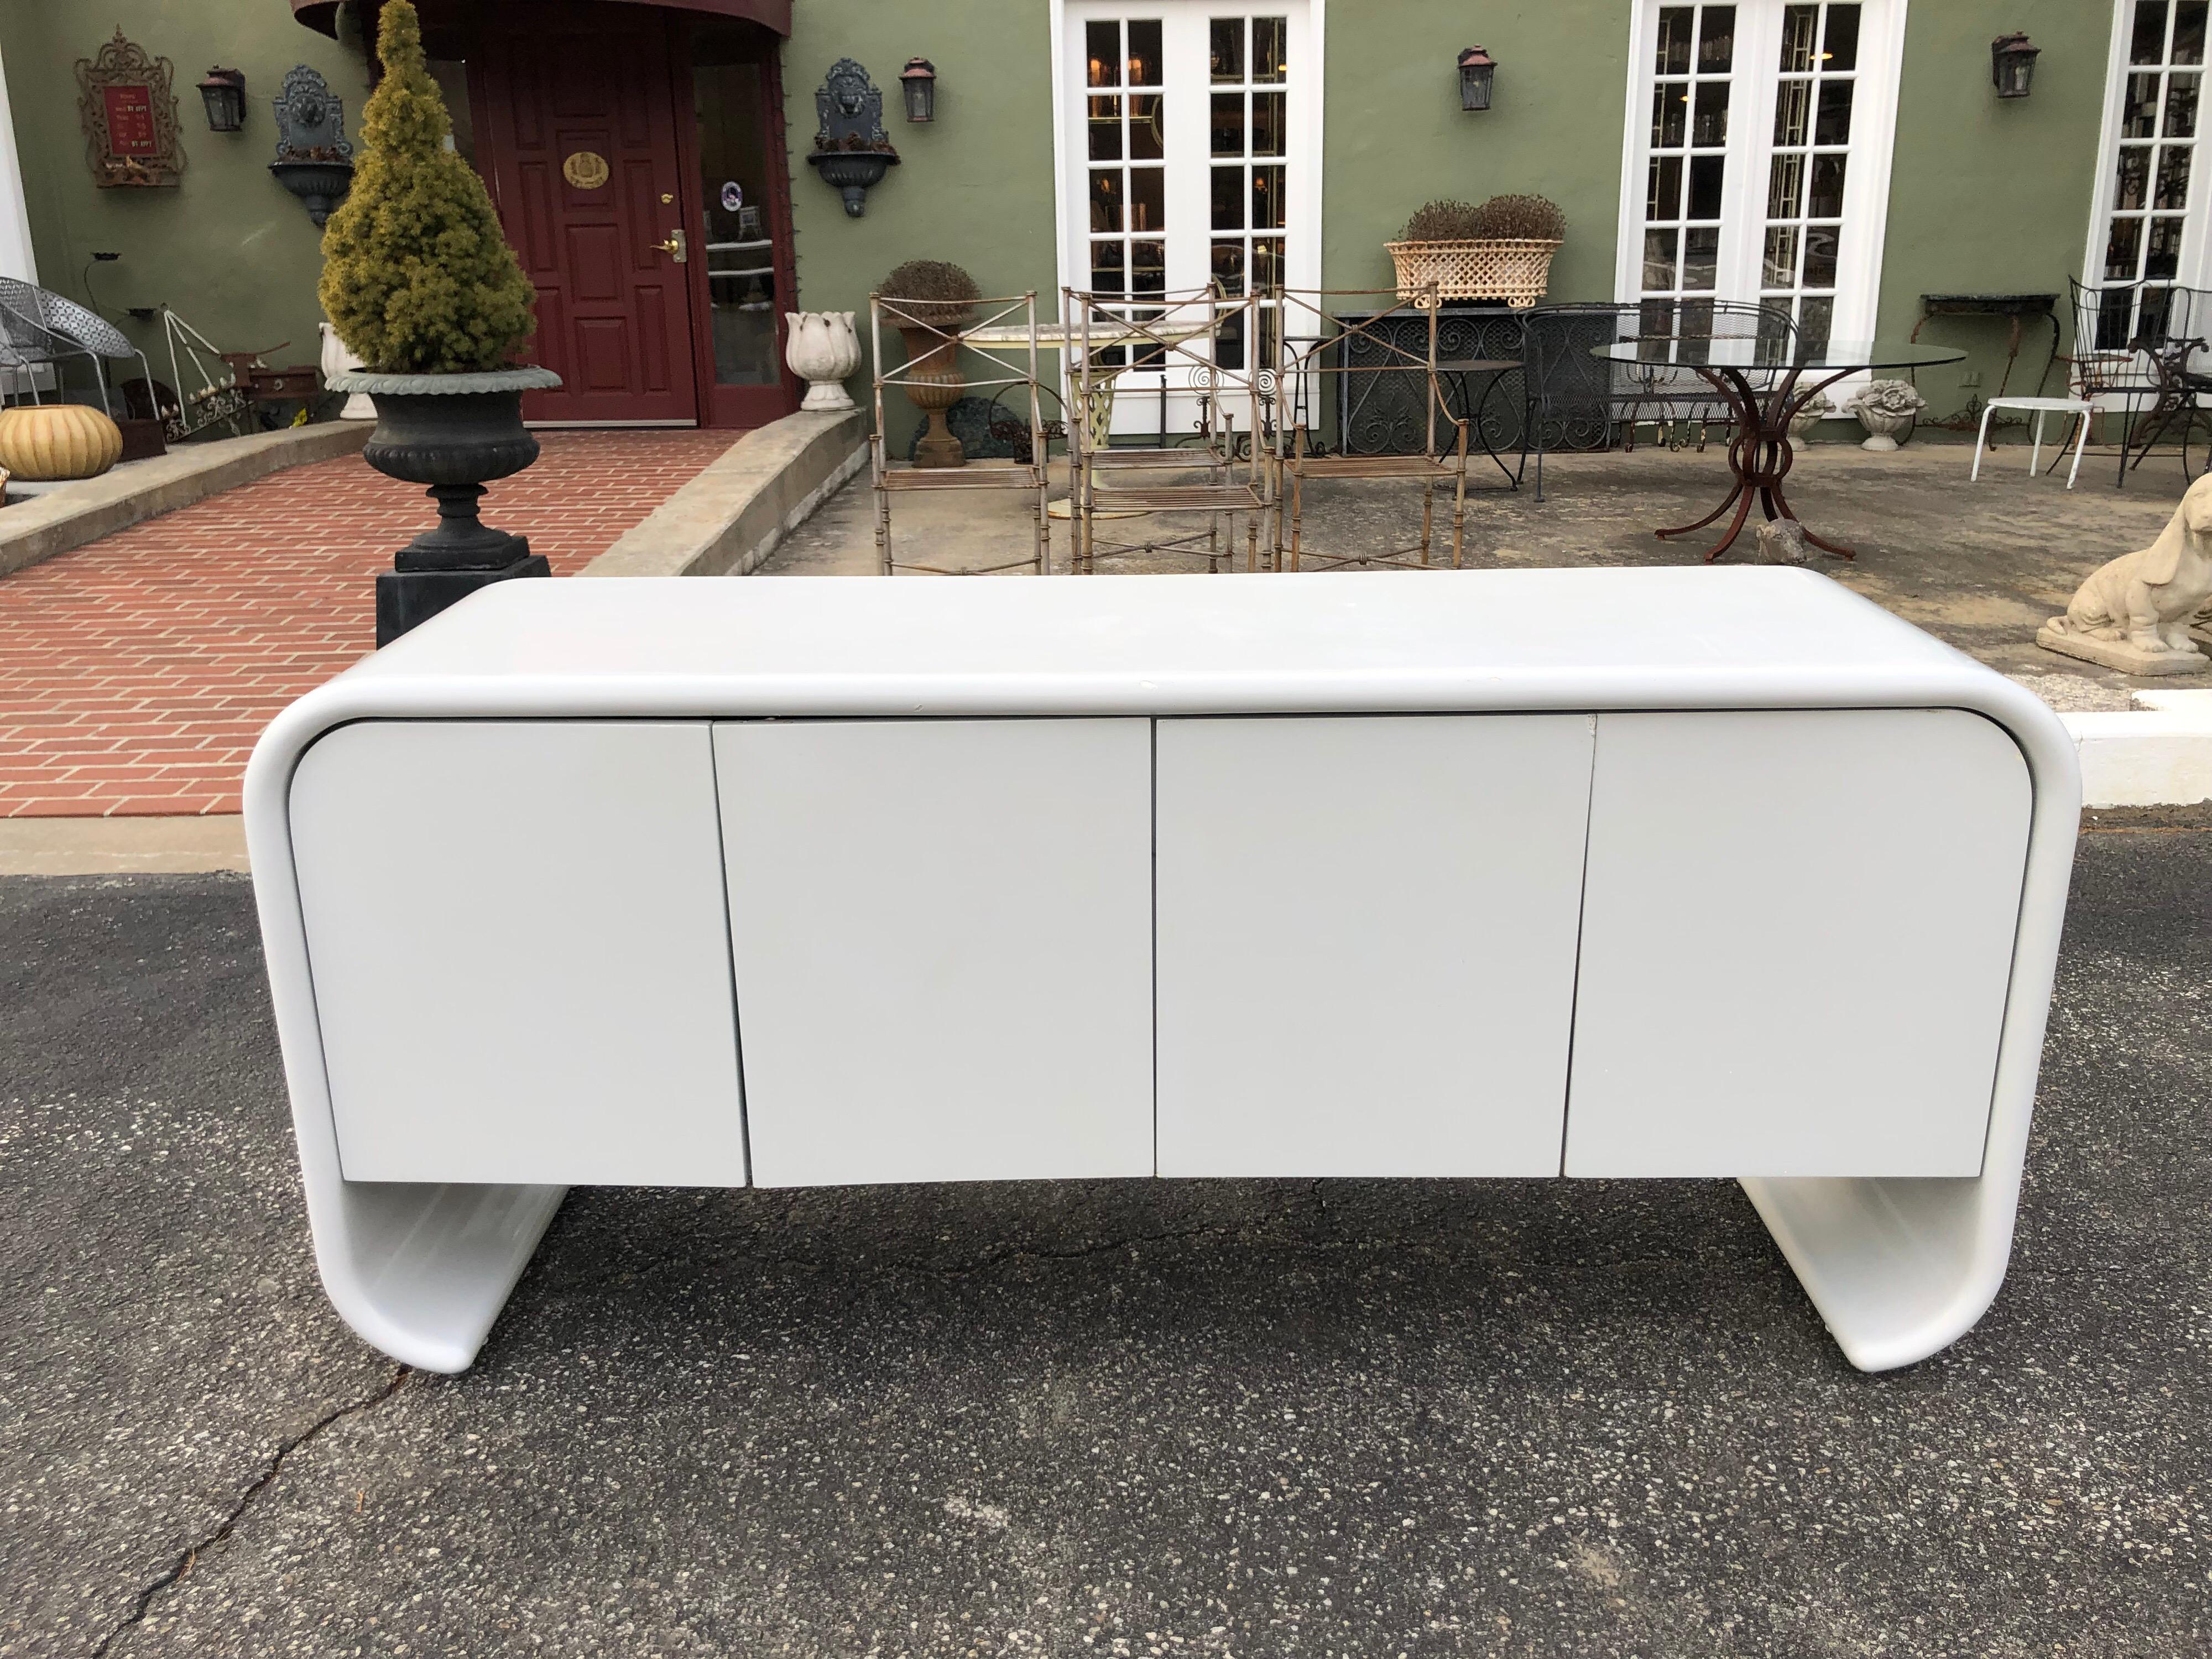 White lacquered Waterfall credenza in the style of Karl Springer. Possibly made by Ello Furniture. Amazing style and storage to this classic clean beauty. Four magnetic doors open up to cabinets each with single drawers. One is lined with felt for